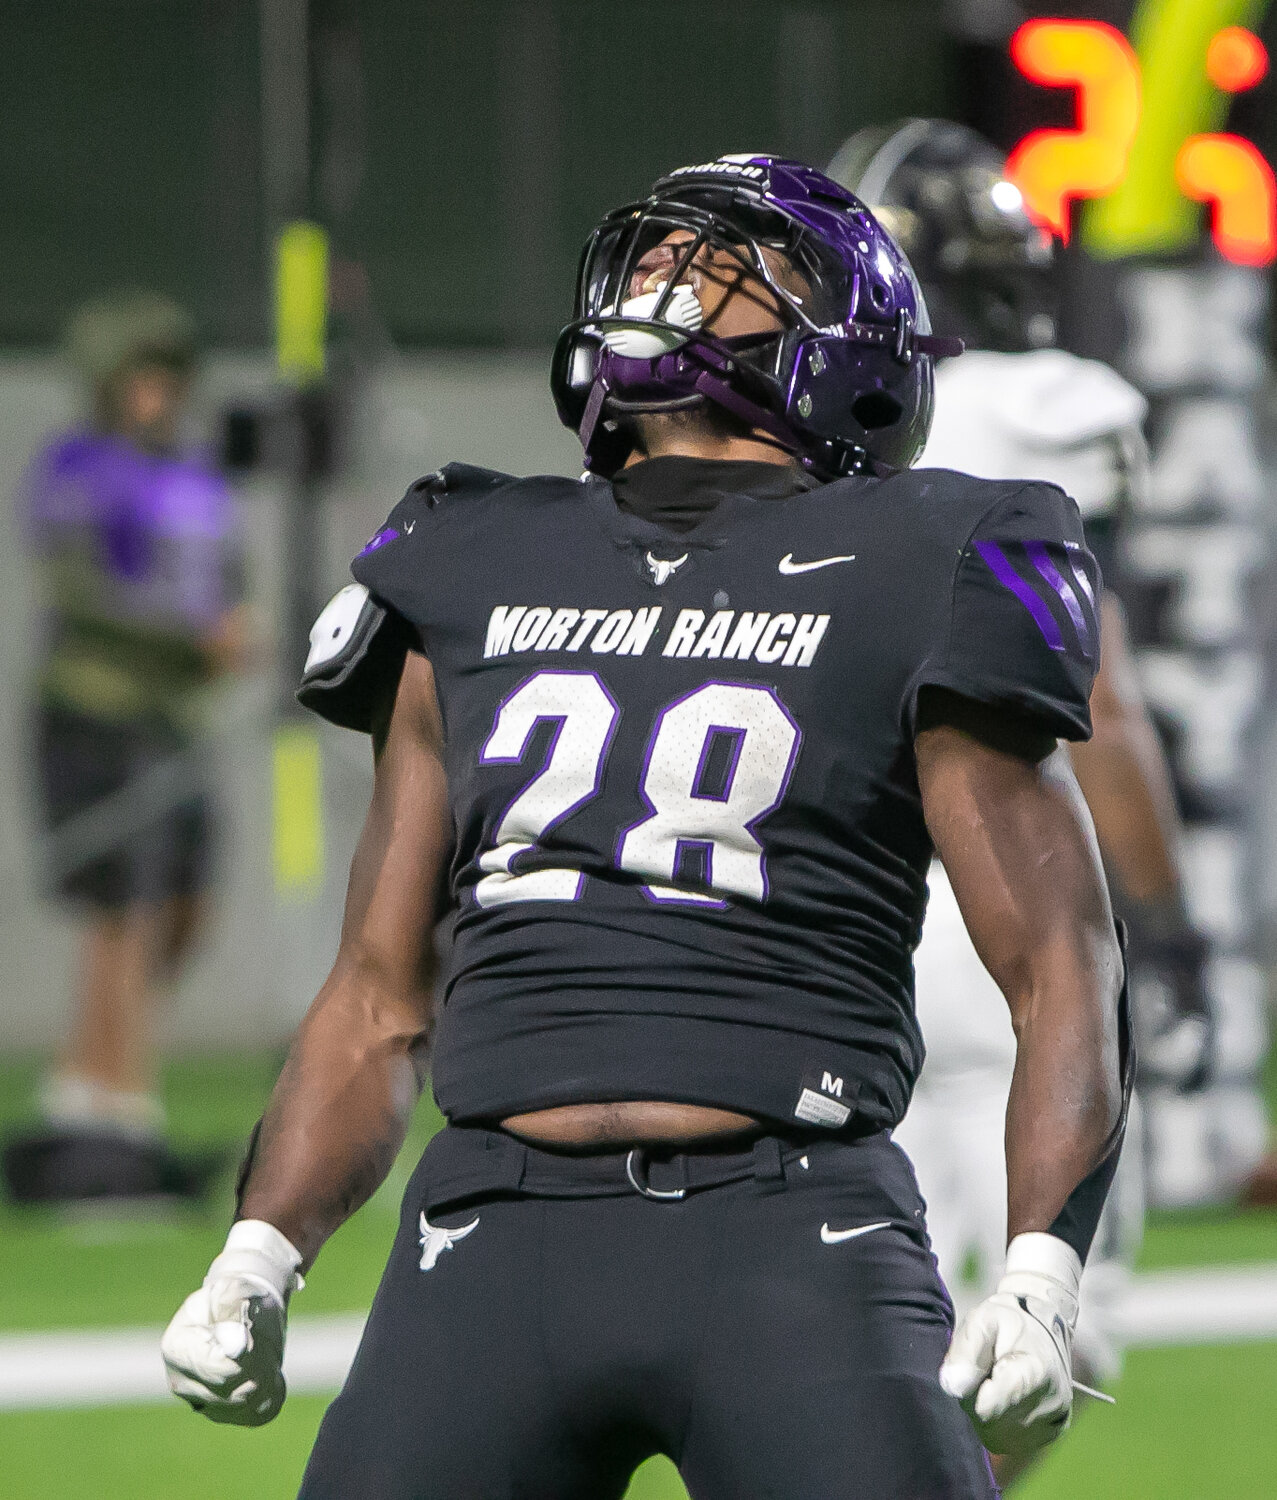 Ryan Hall celebrates after scoring a touchdown during Thursday's game between Jordan and Morton Ranch at Legacy Stadium.